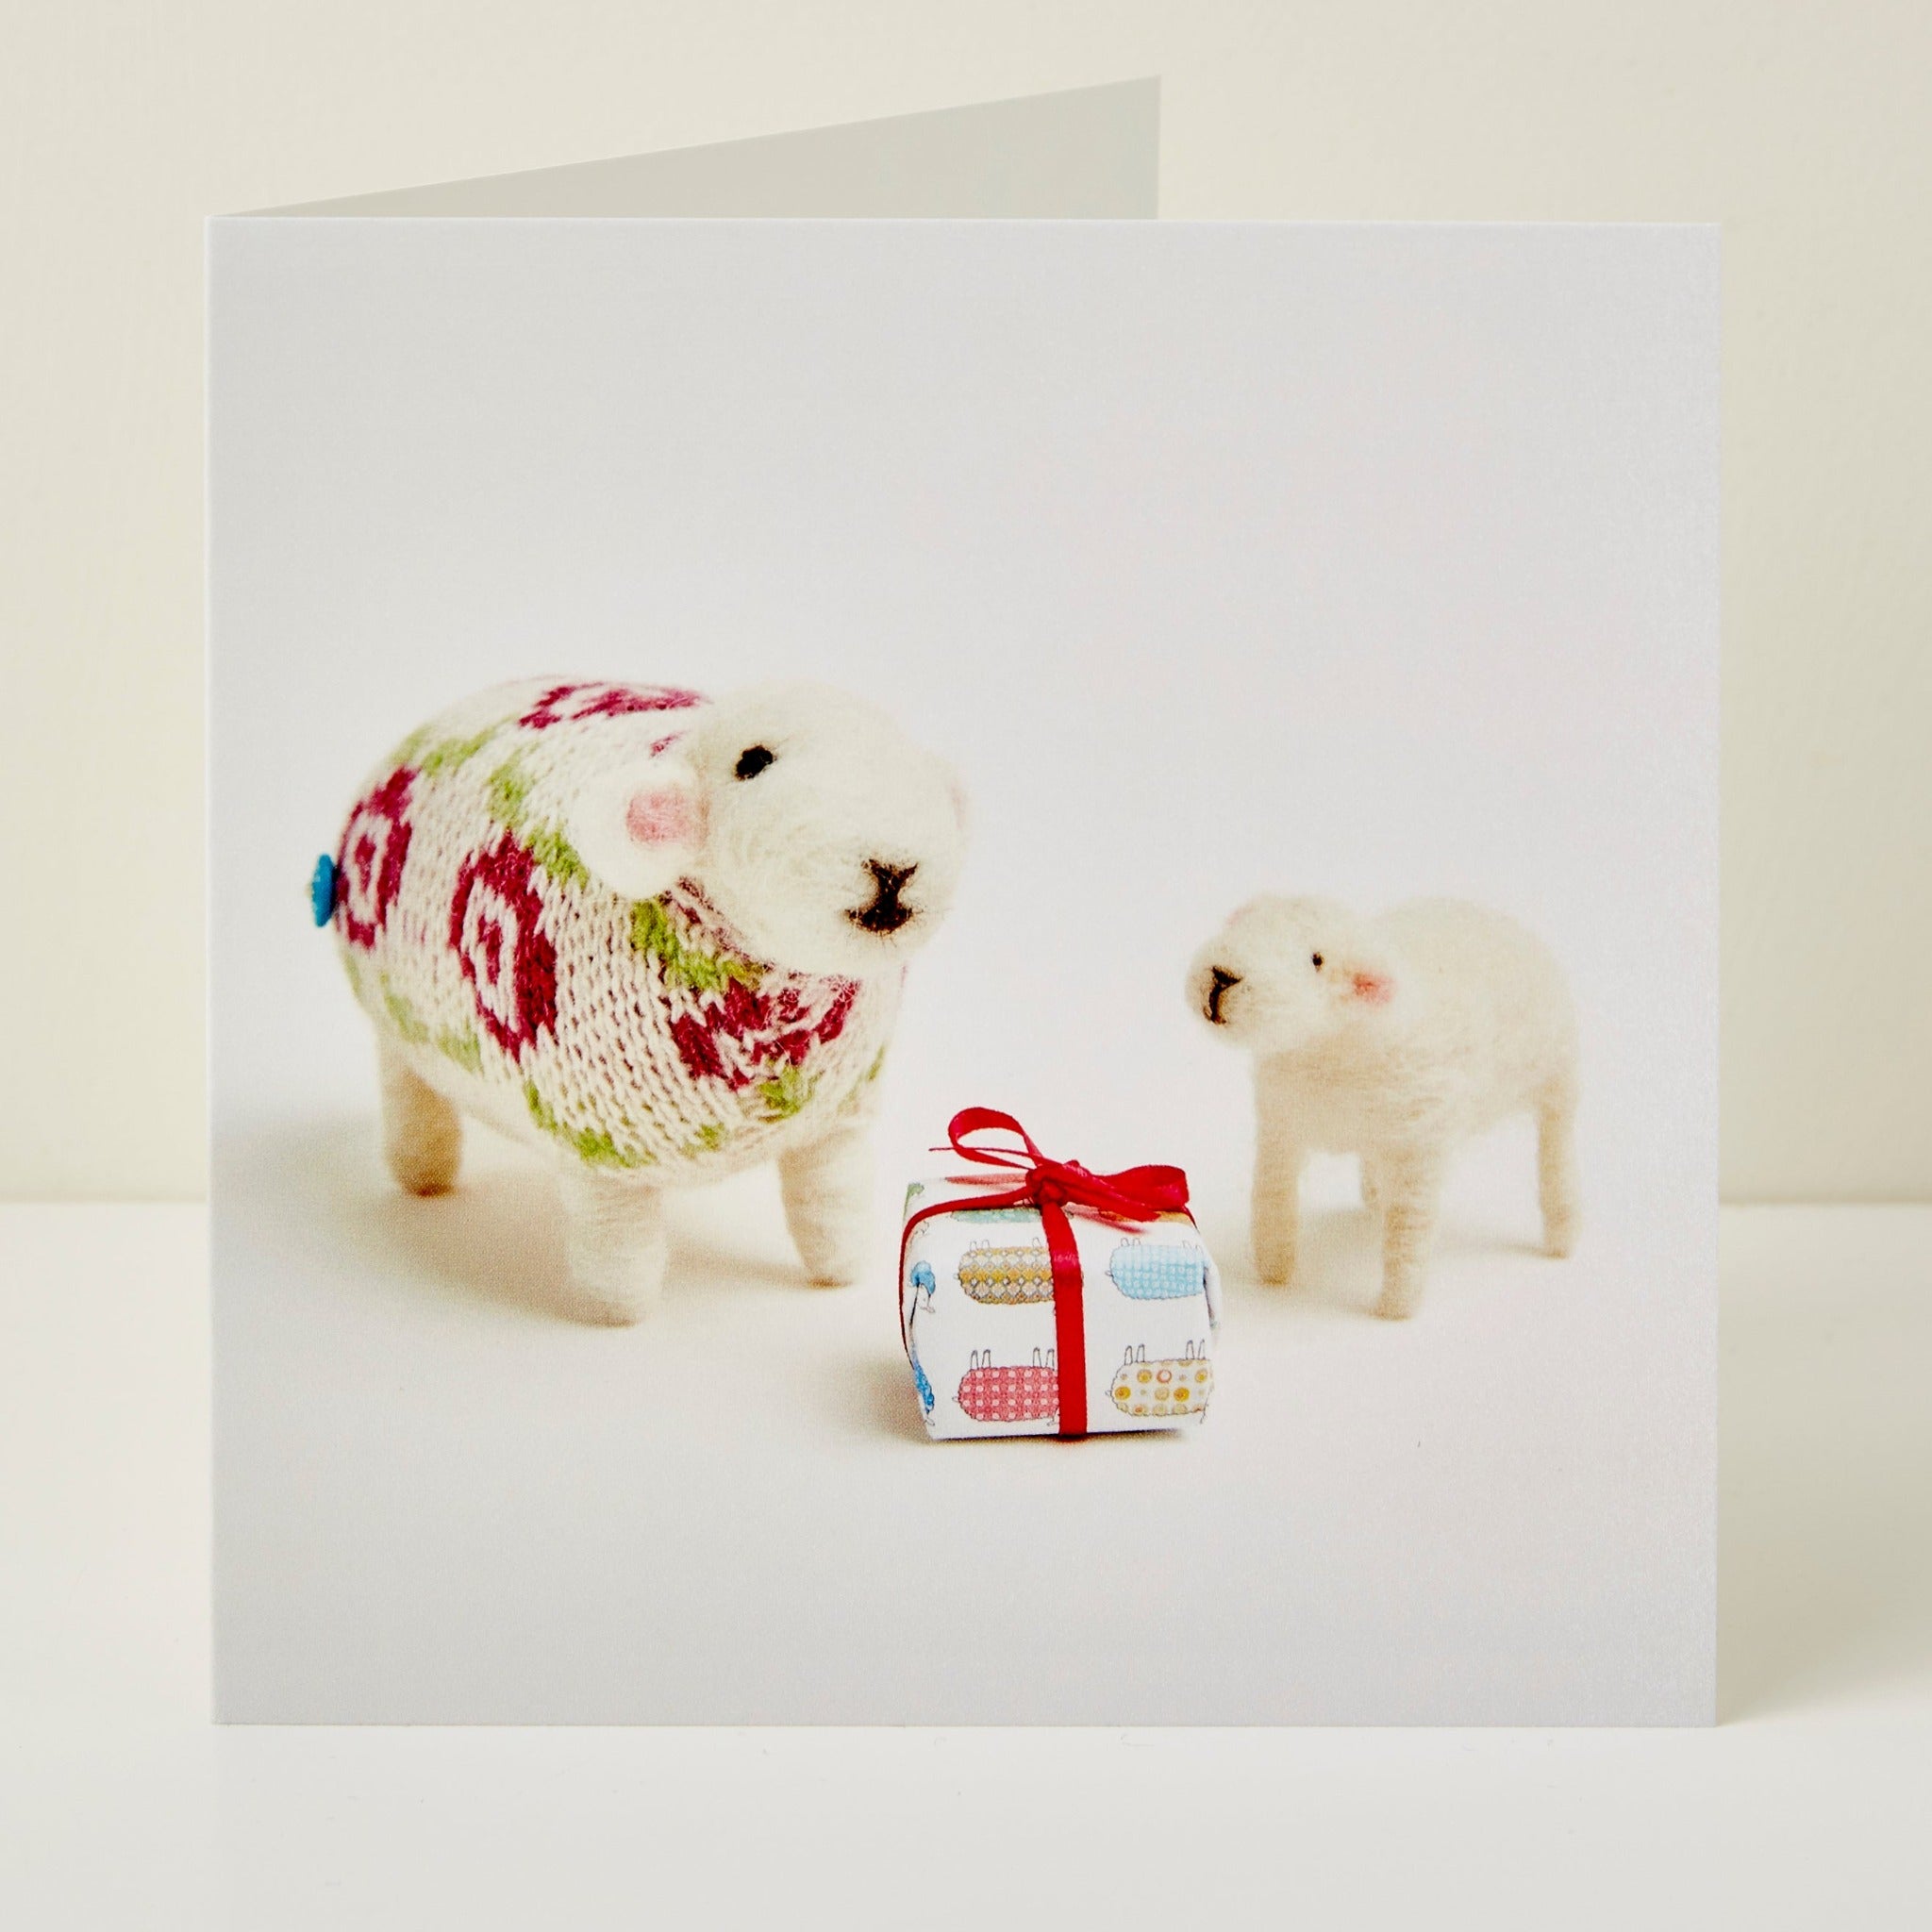 Special Mum Greeting Card by Mary Kilvert